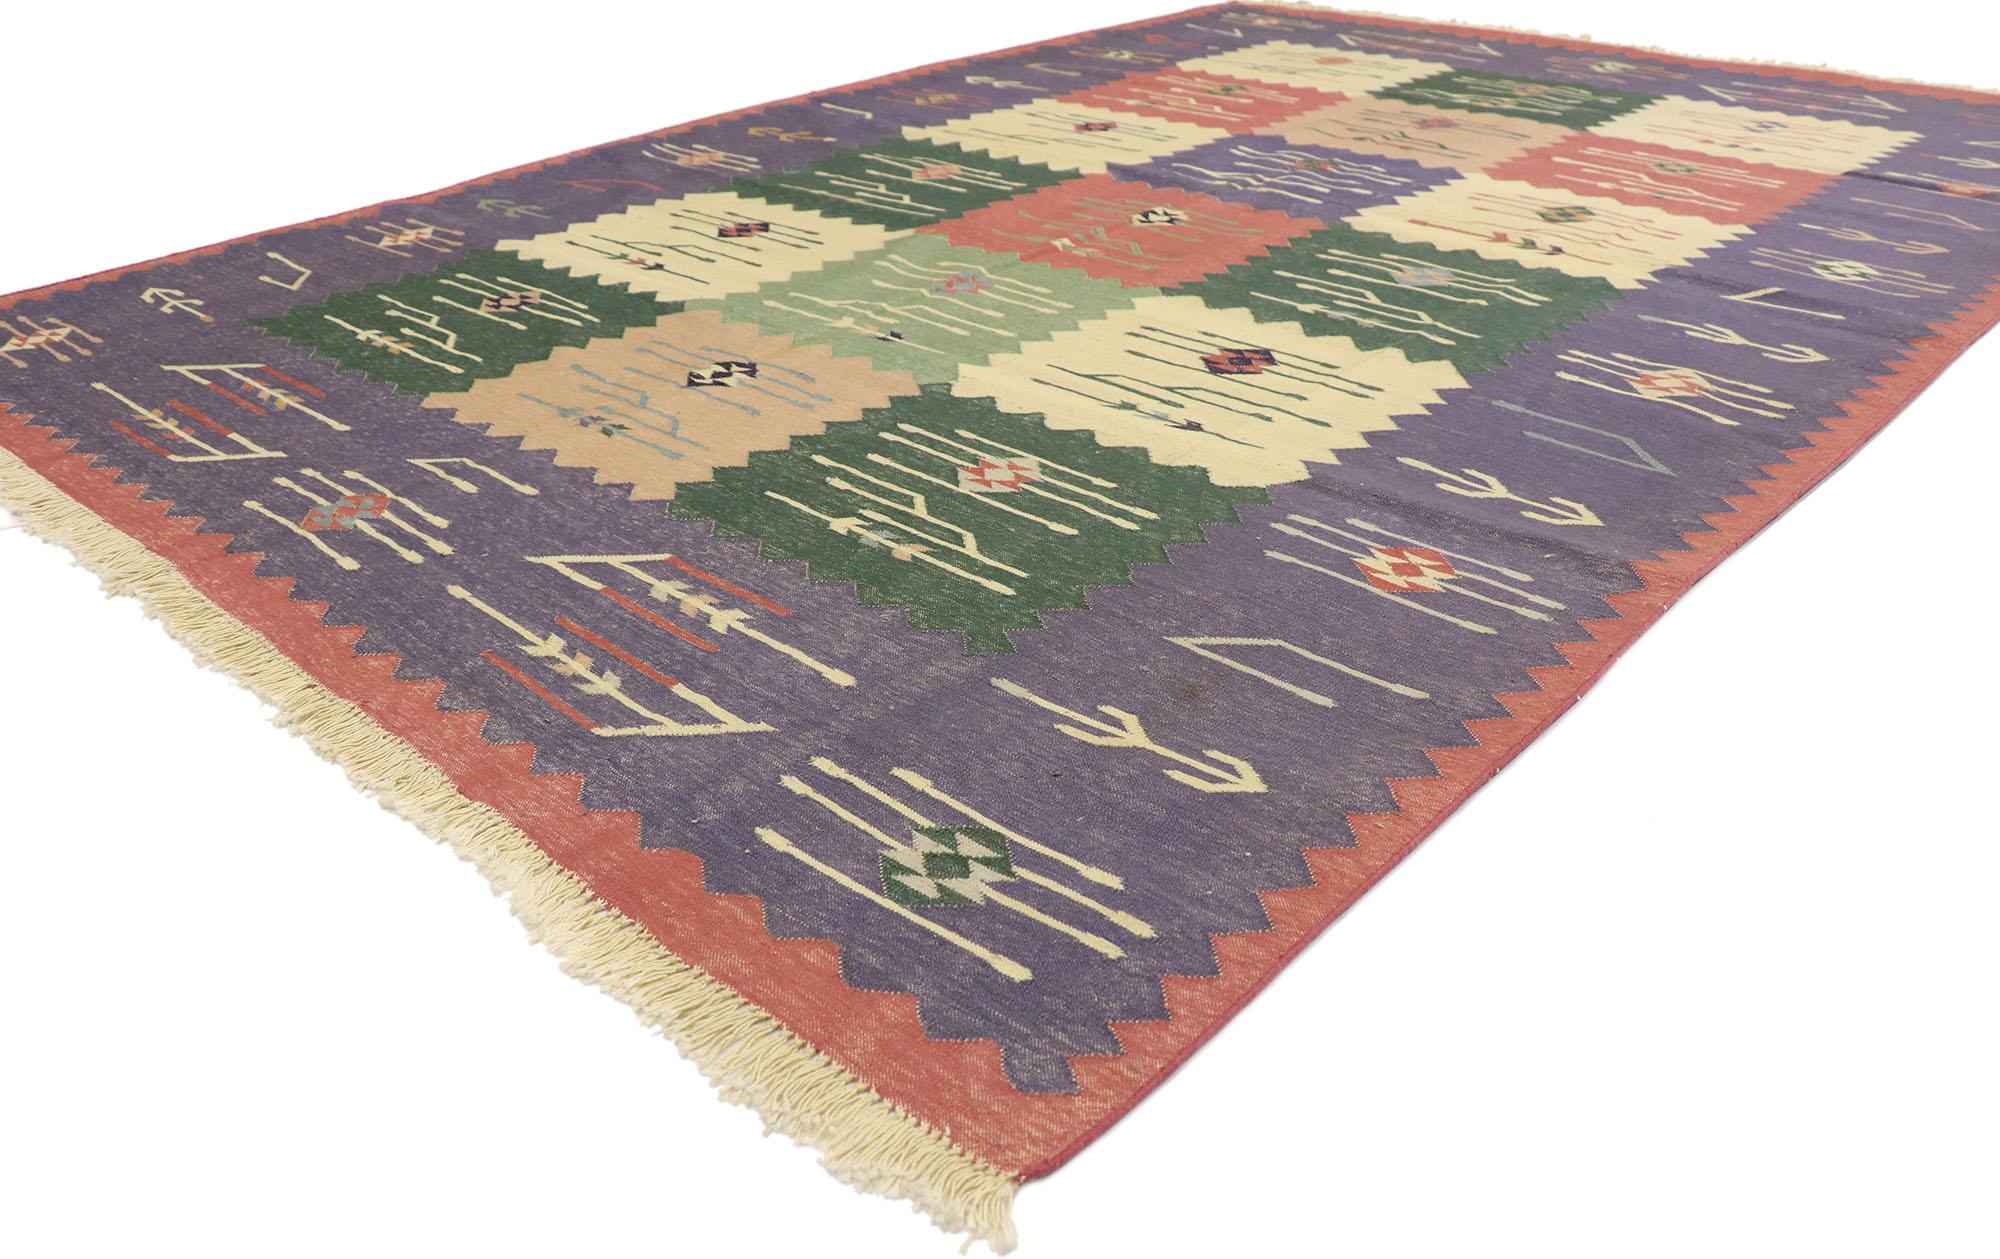 77936 Vintage Romanian Kilim rug 06'00 x 08'11. With its effortless beauty and timeless style, this hand-woven wool vintage Romanian floral kilim rug is a captivating vision of woven beauty. The abrashed beige field beautifully displays a garden